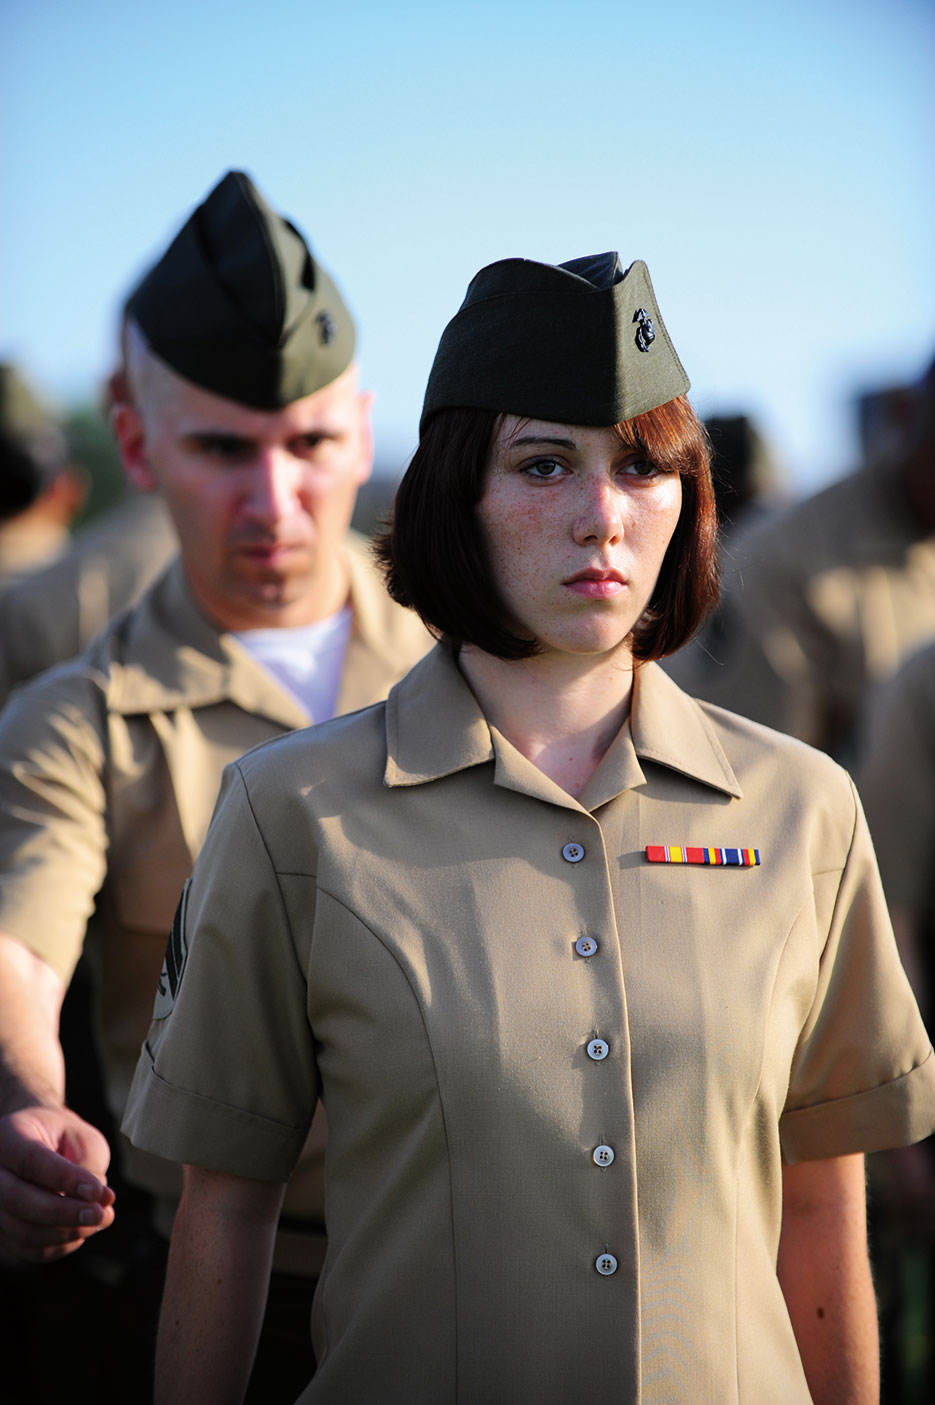 Instructor inspects Marine’s uniform during 16-day Corporals Course, U.S. Marine Corps Enlisted Professional Military Education course, which was taught for first time at Dyess Air Force Base, Texas, August 5, 2010 (U.S. Air Force/Domonique Washington)